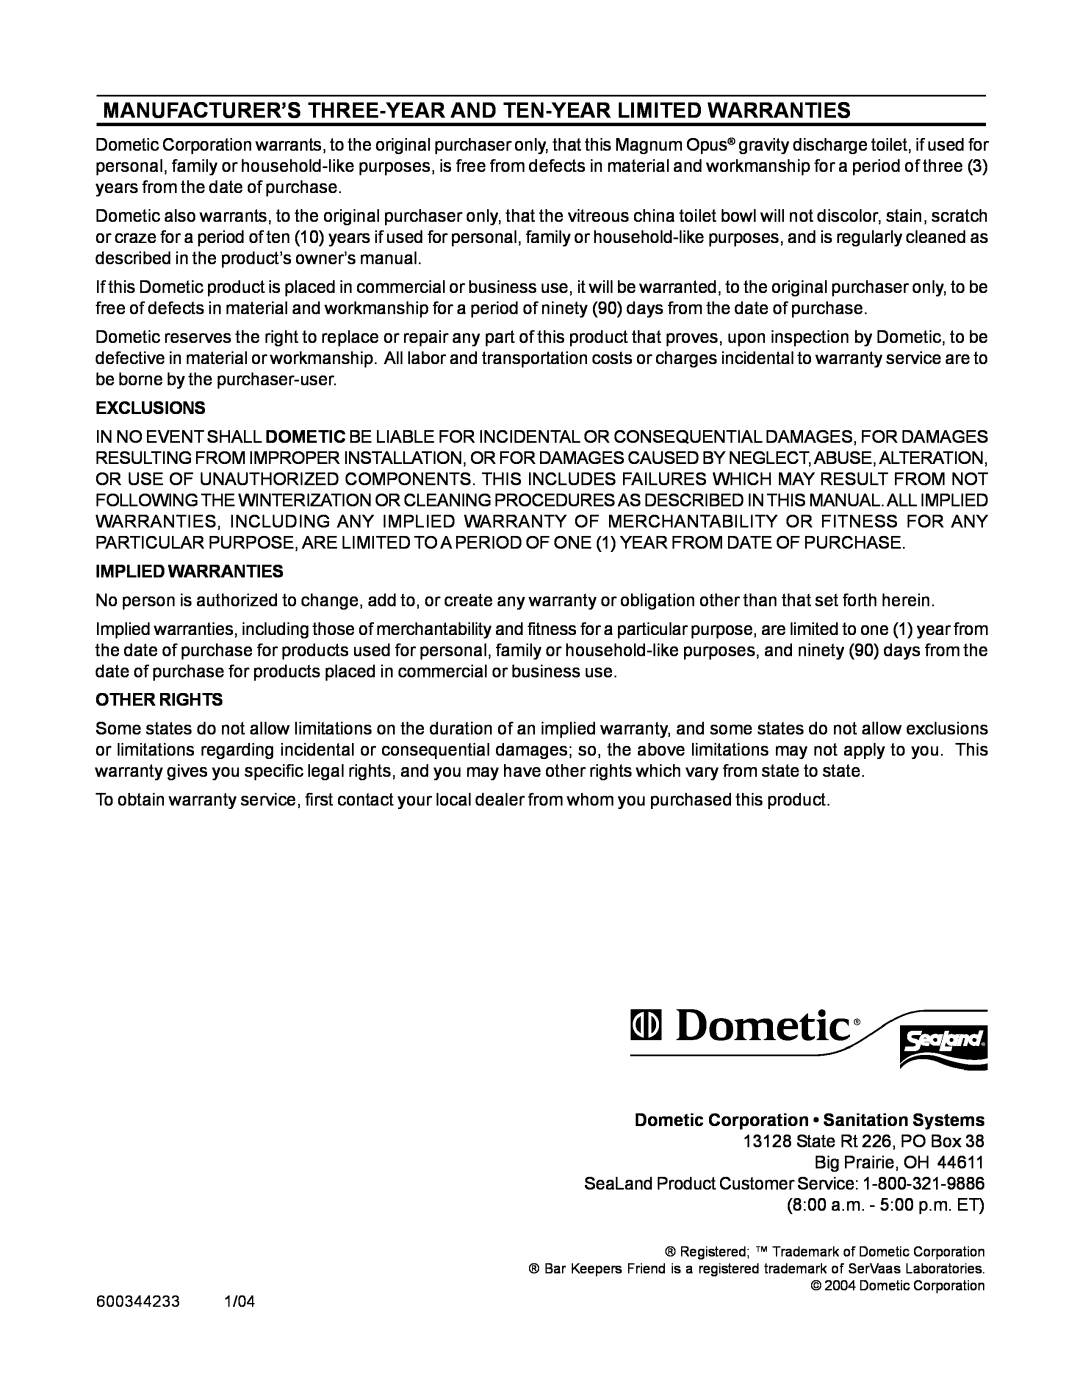 Dometic 3000 Series owner manual Exclusions, Implied Warranties, Other Rights, Dometic Corporation Sanitation Systems 